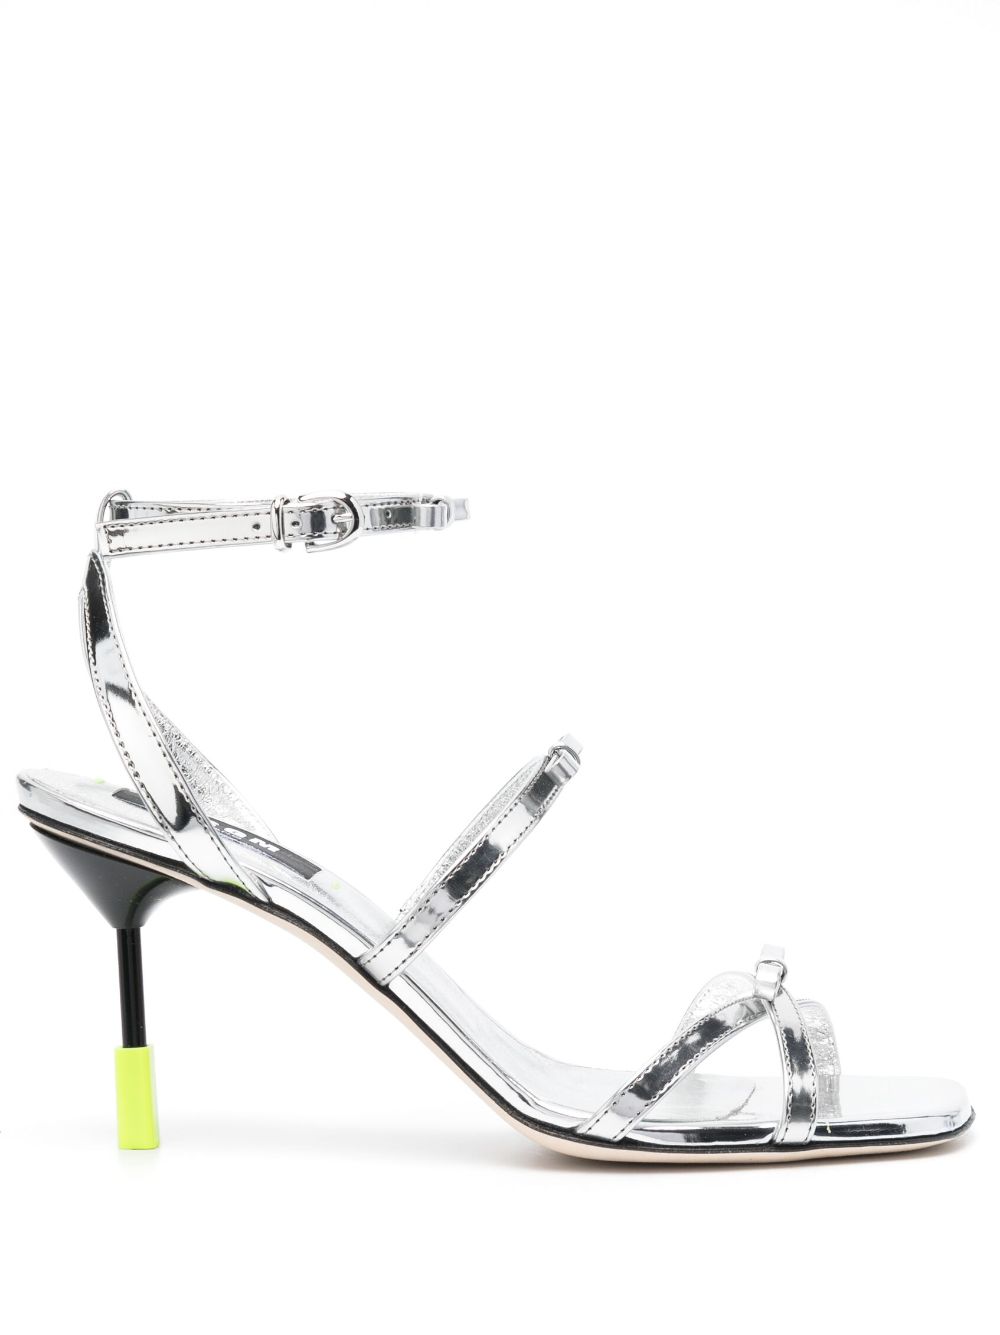 MSGM BOW-DETAIL LEATHER 90MM SANDALS